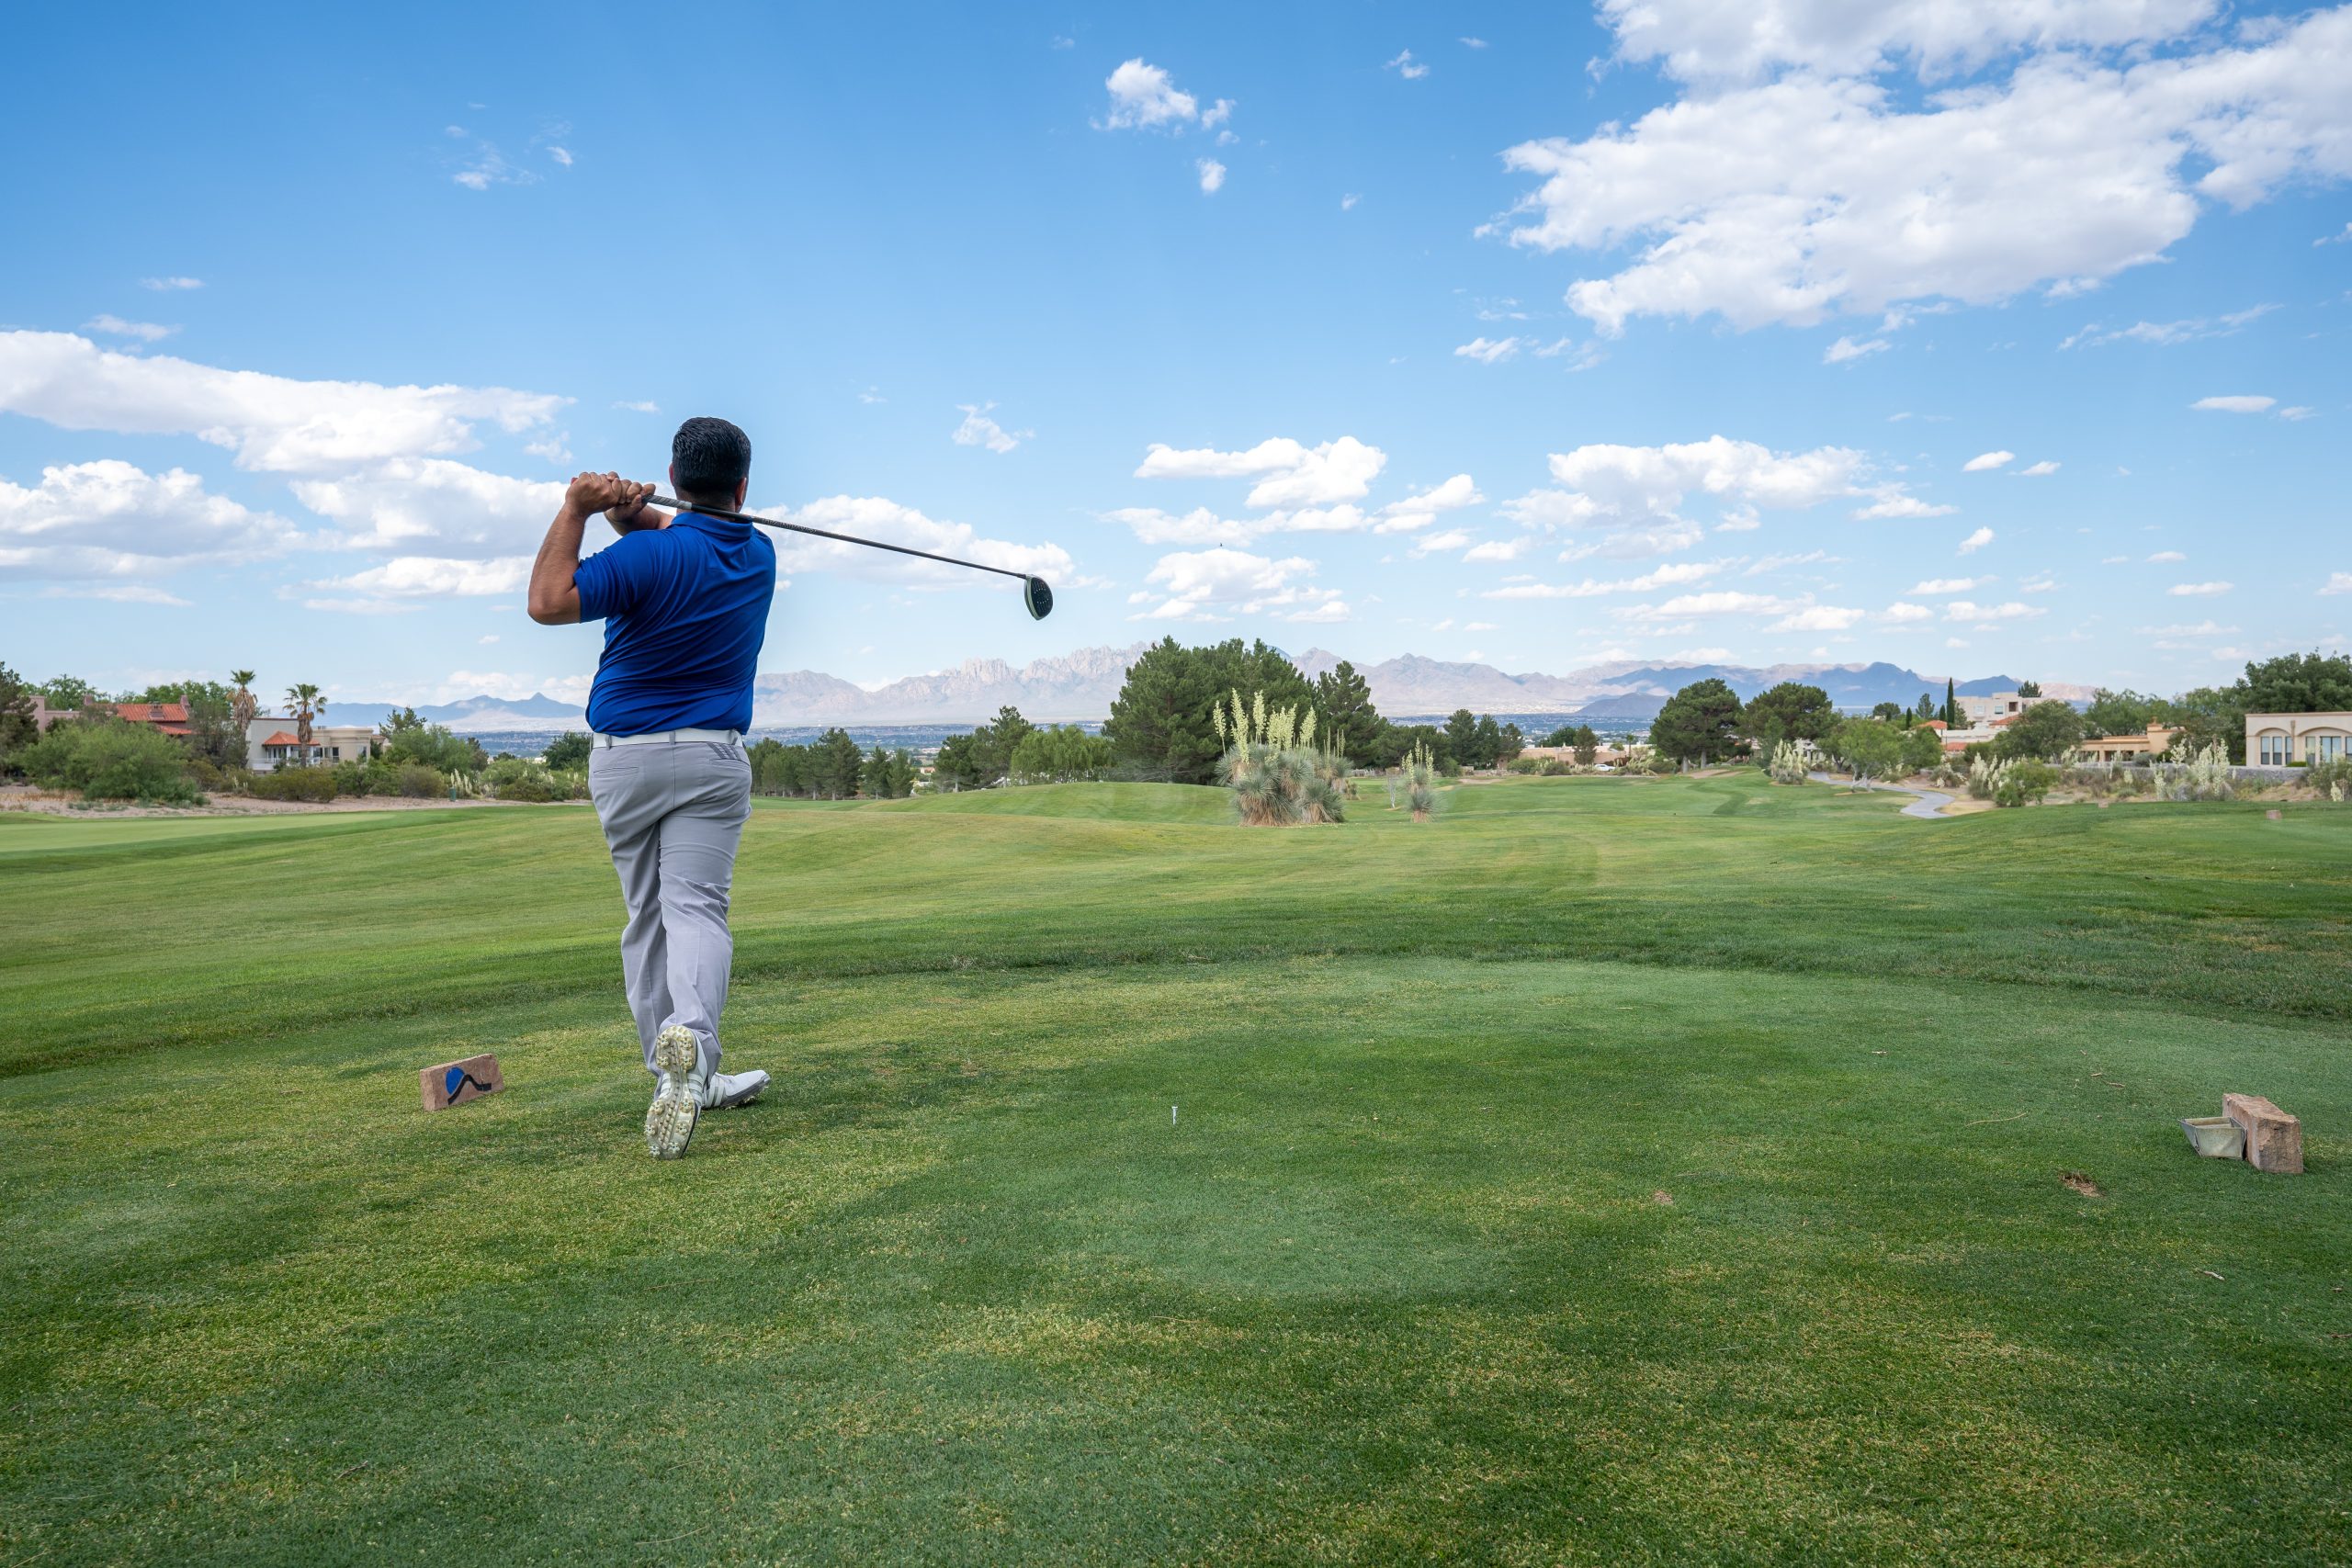 Dressing Like a Pro Golfer: Tips on How to Replicate Your Favorite Golf Player’s Style